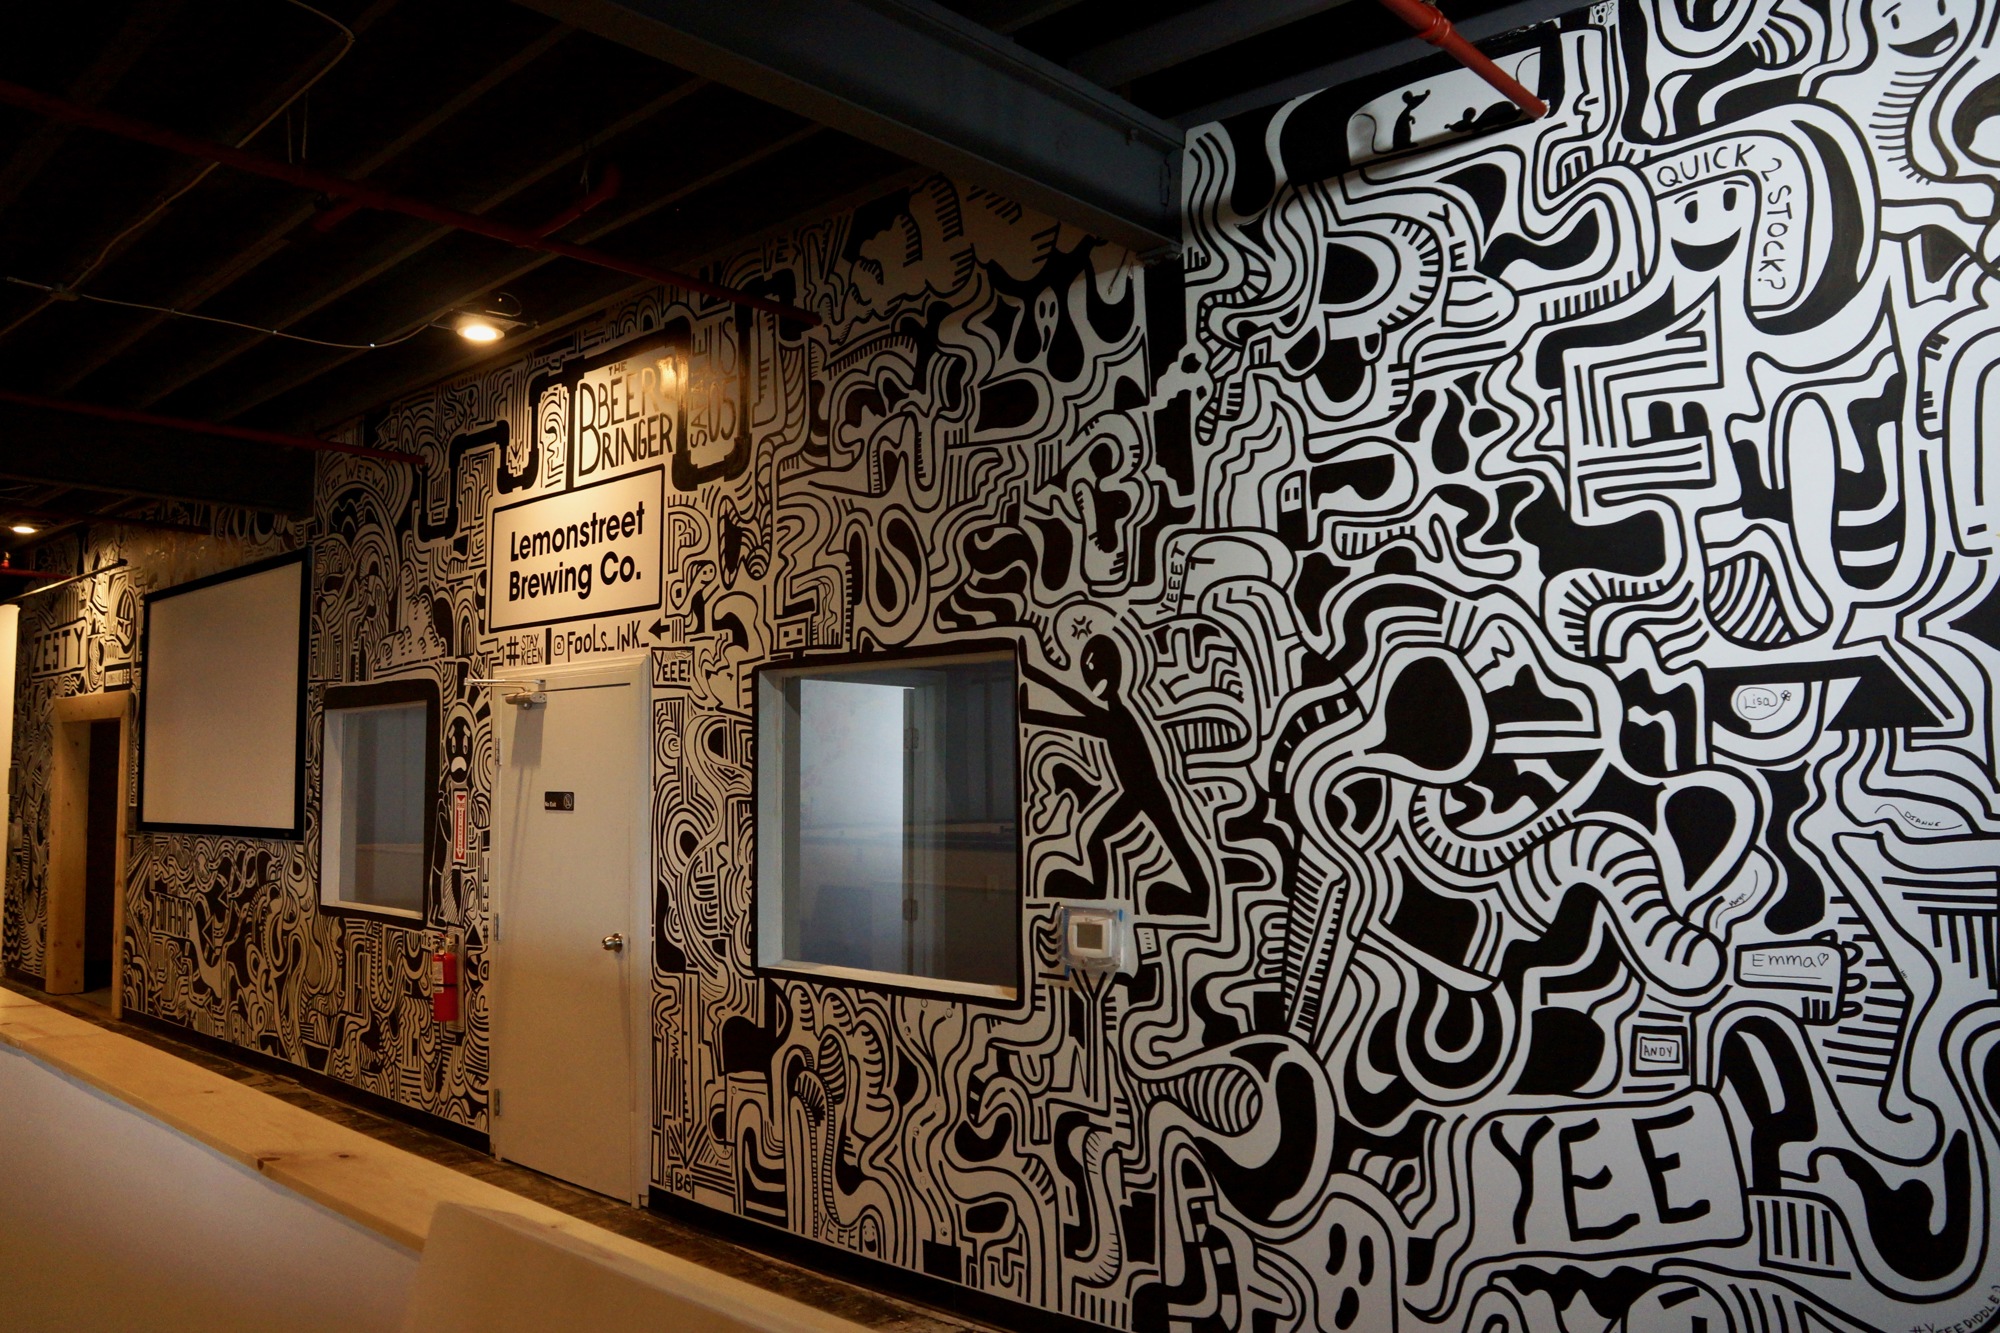 Artist Fools Ink completed the mural on the back wall of the brewery as the first customers arrived last week.